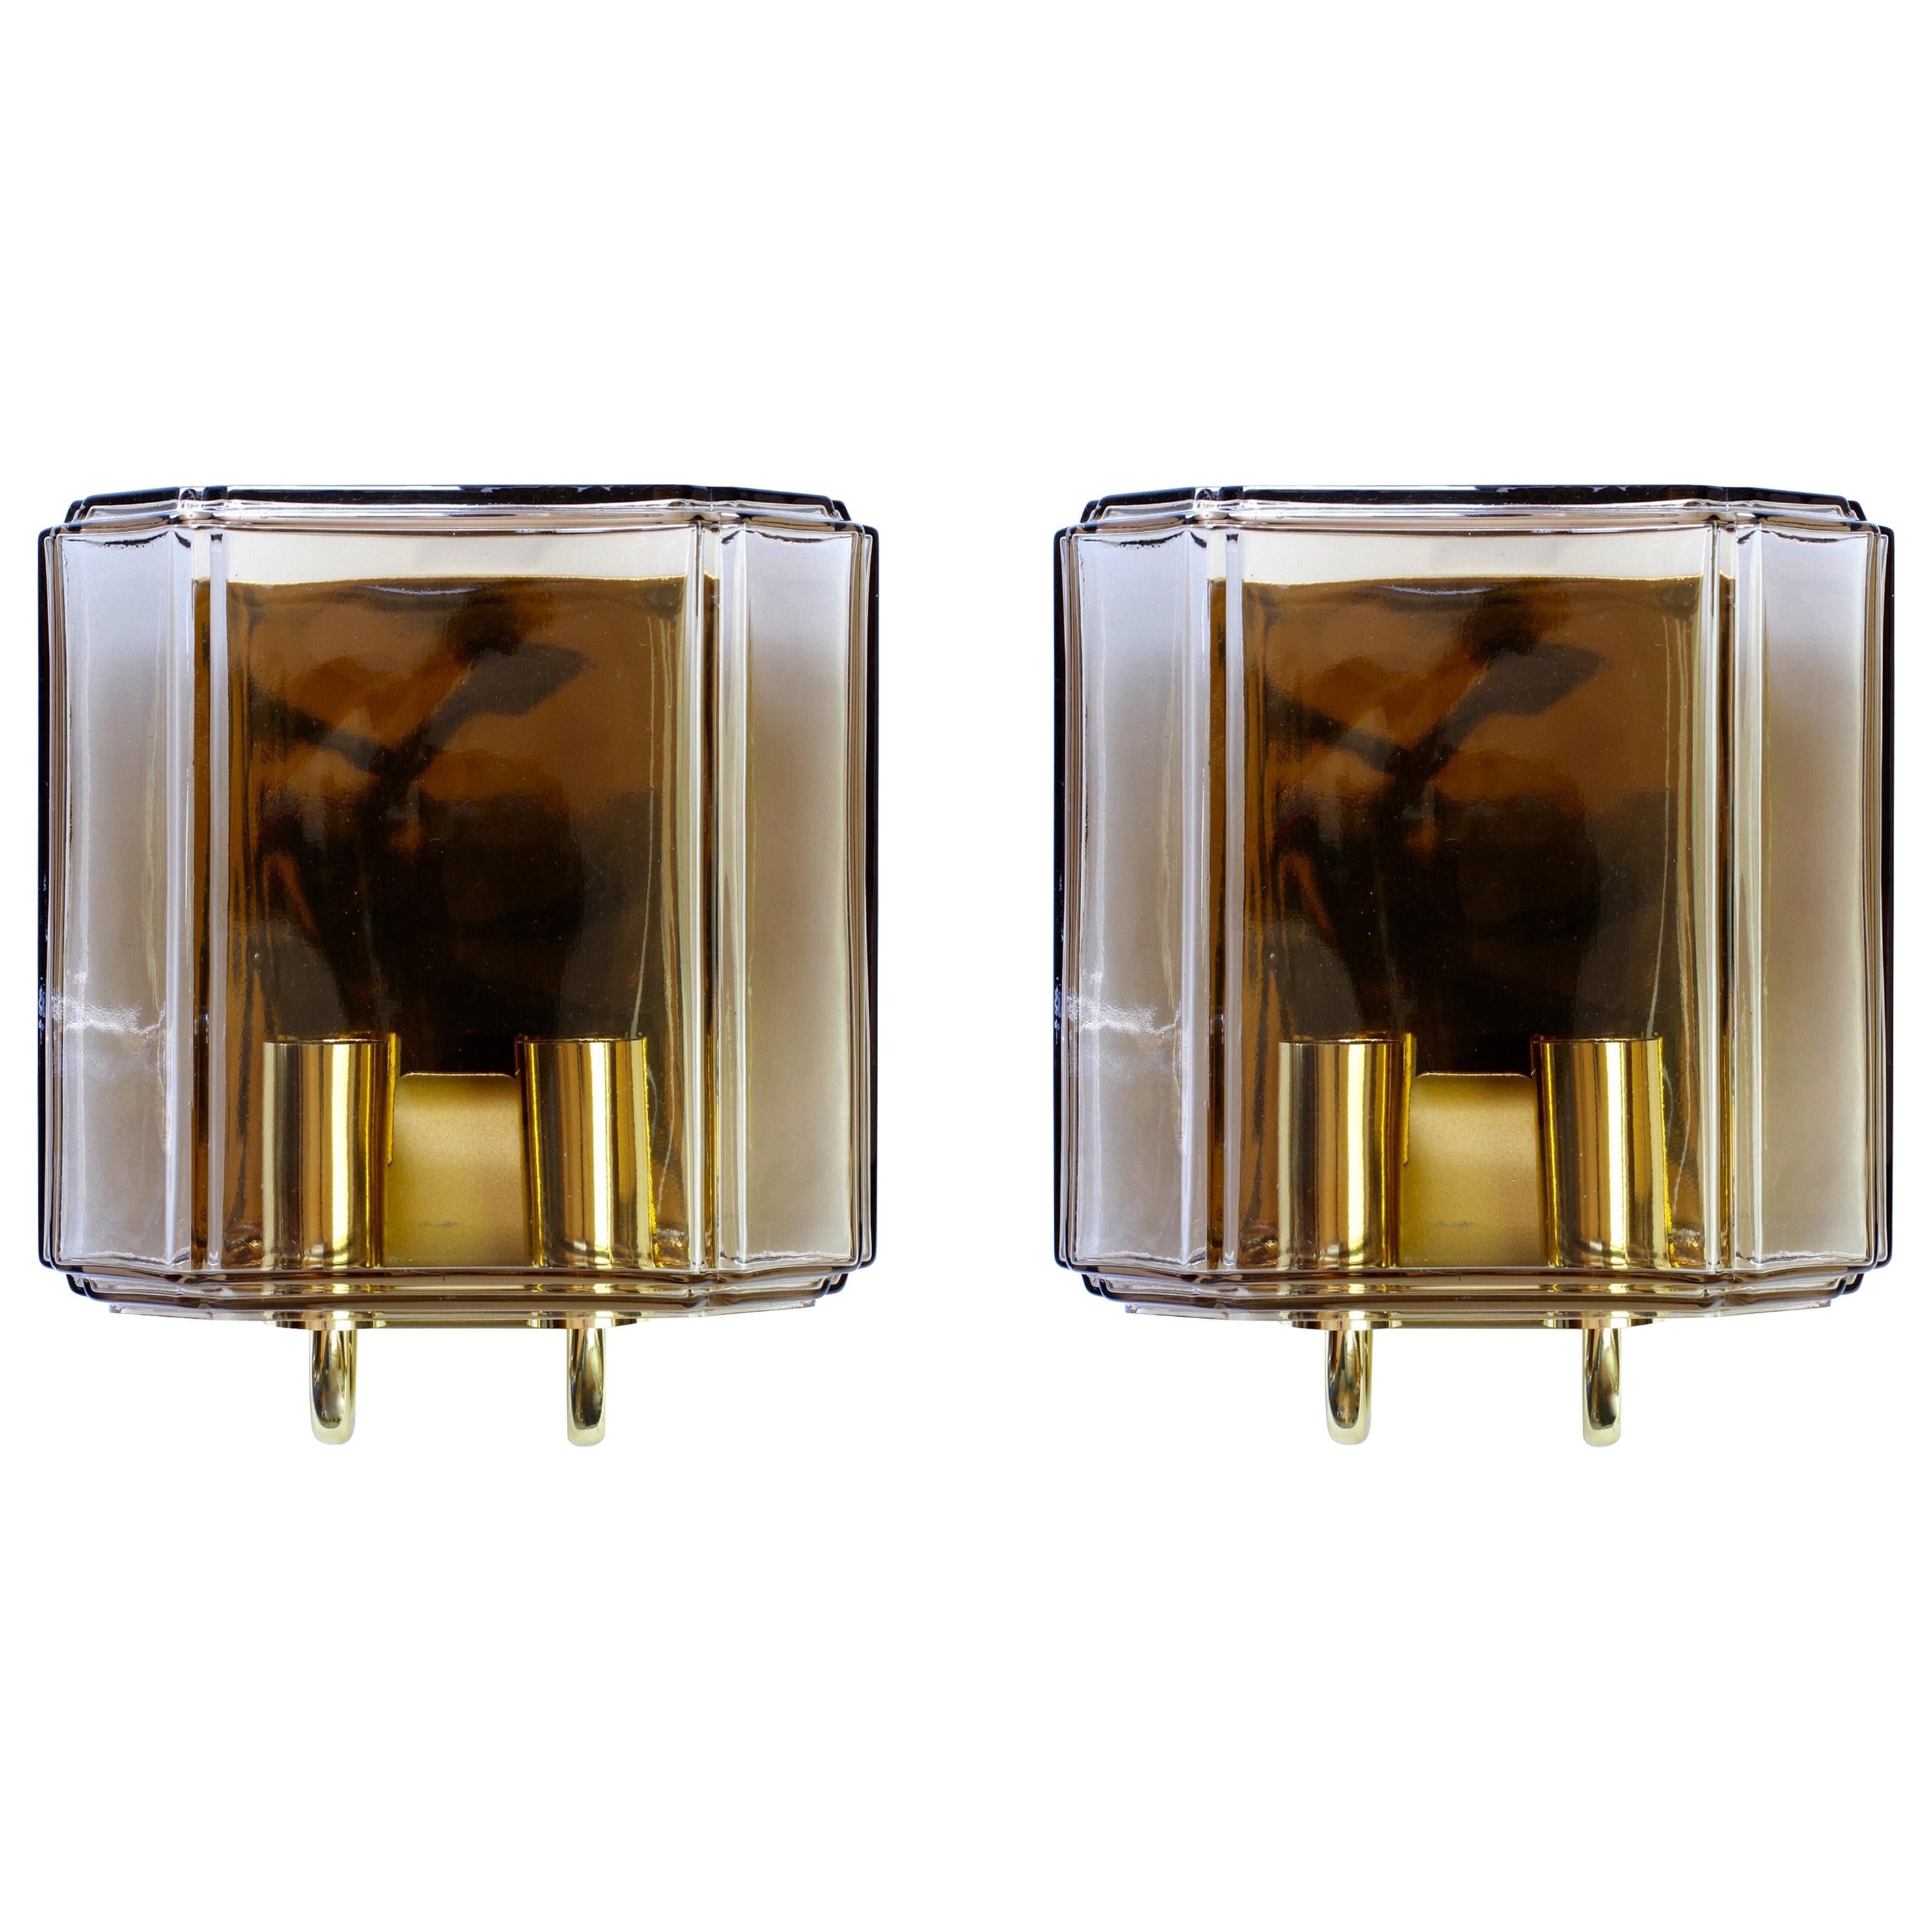 Vintage 1970s Pair of Toned Glass Wall Mounted Sconces by Limburg, Germany For Sale